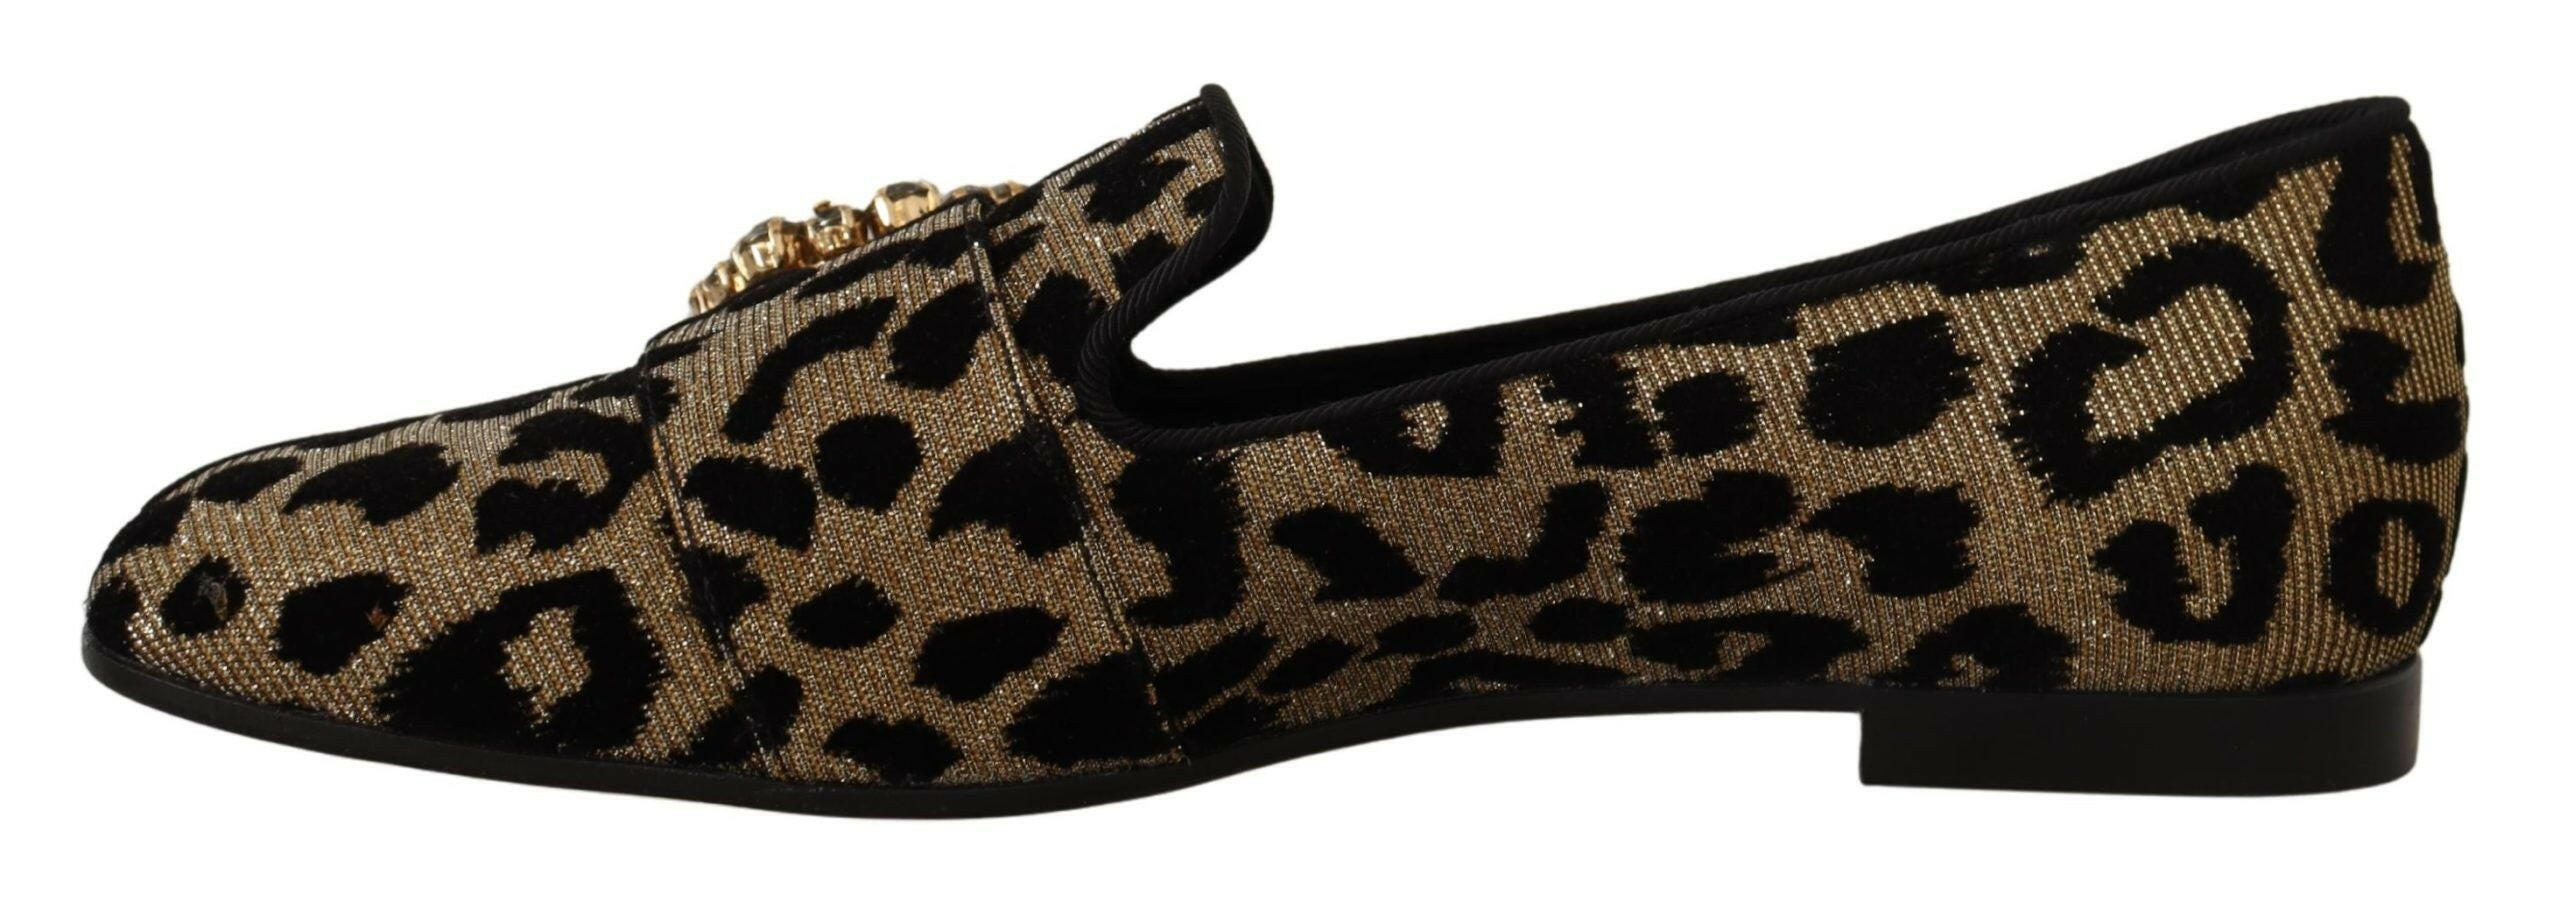 Dolce & Gabbana Gold Leopard Print Crystals Loafers Shoes - GENUINE AUTHENTIC BRAND LLC  